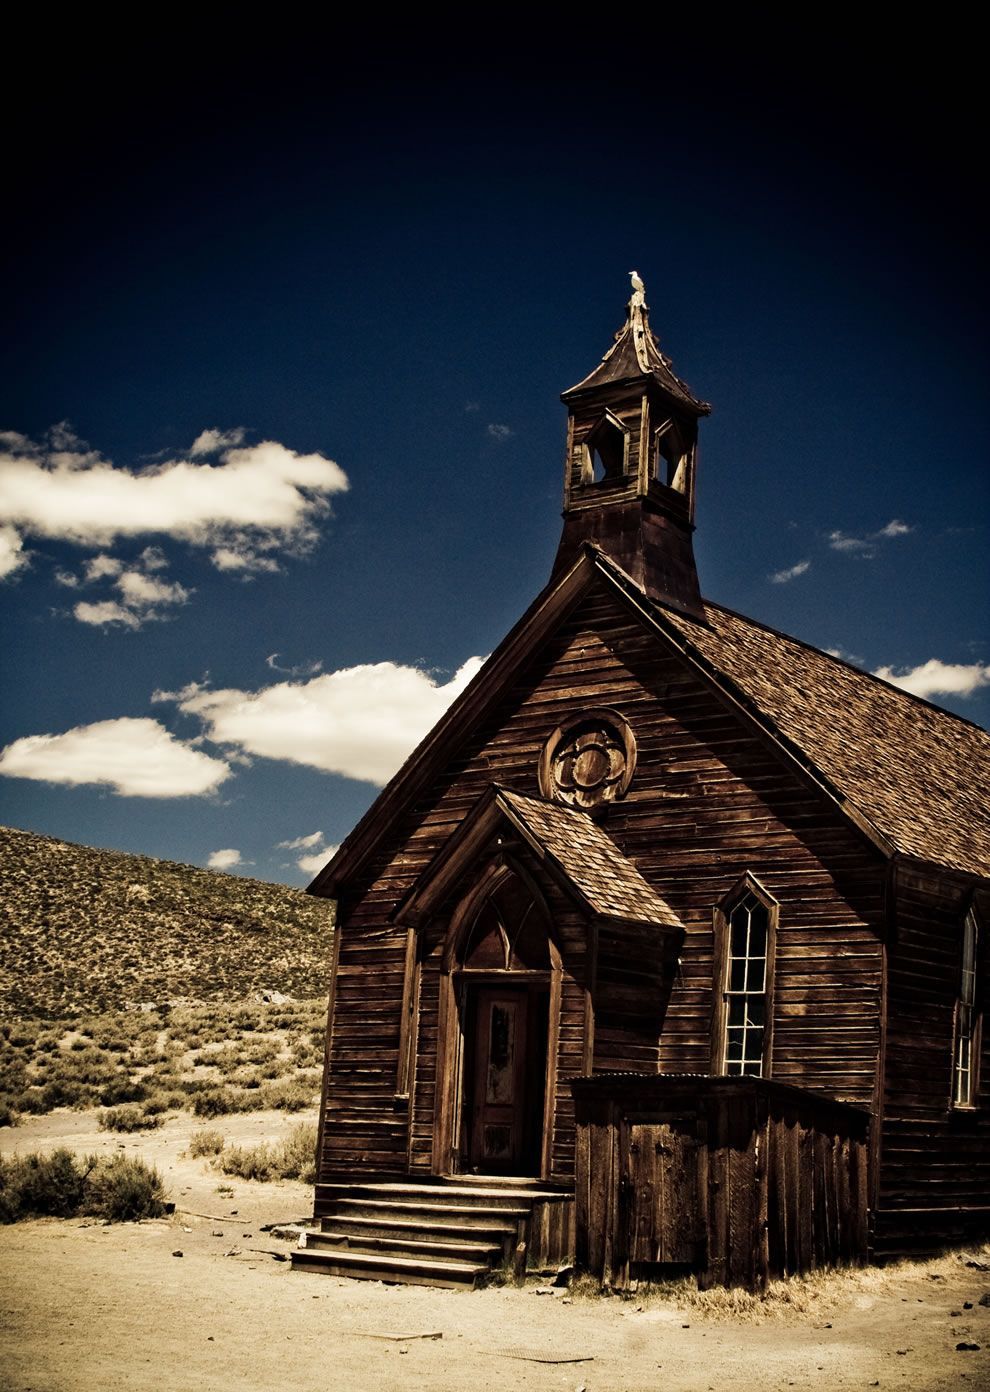 Some fantastic snaphots from Bodie Historic State Park, an old gold mining town thats essentially frozen in time.